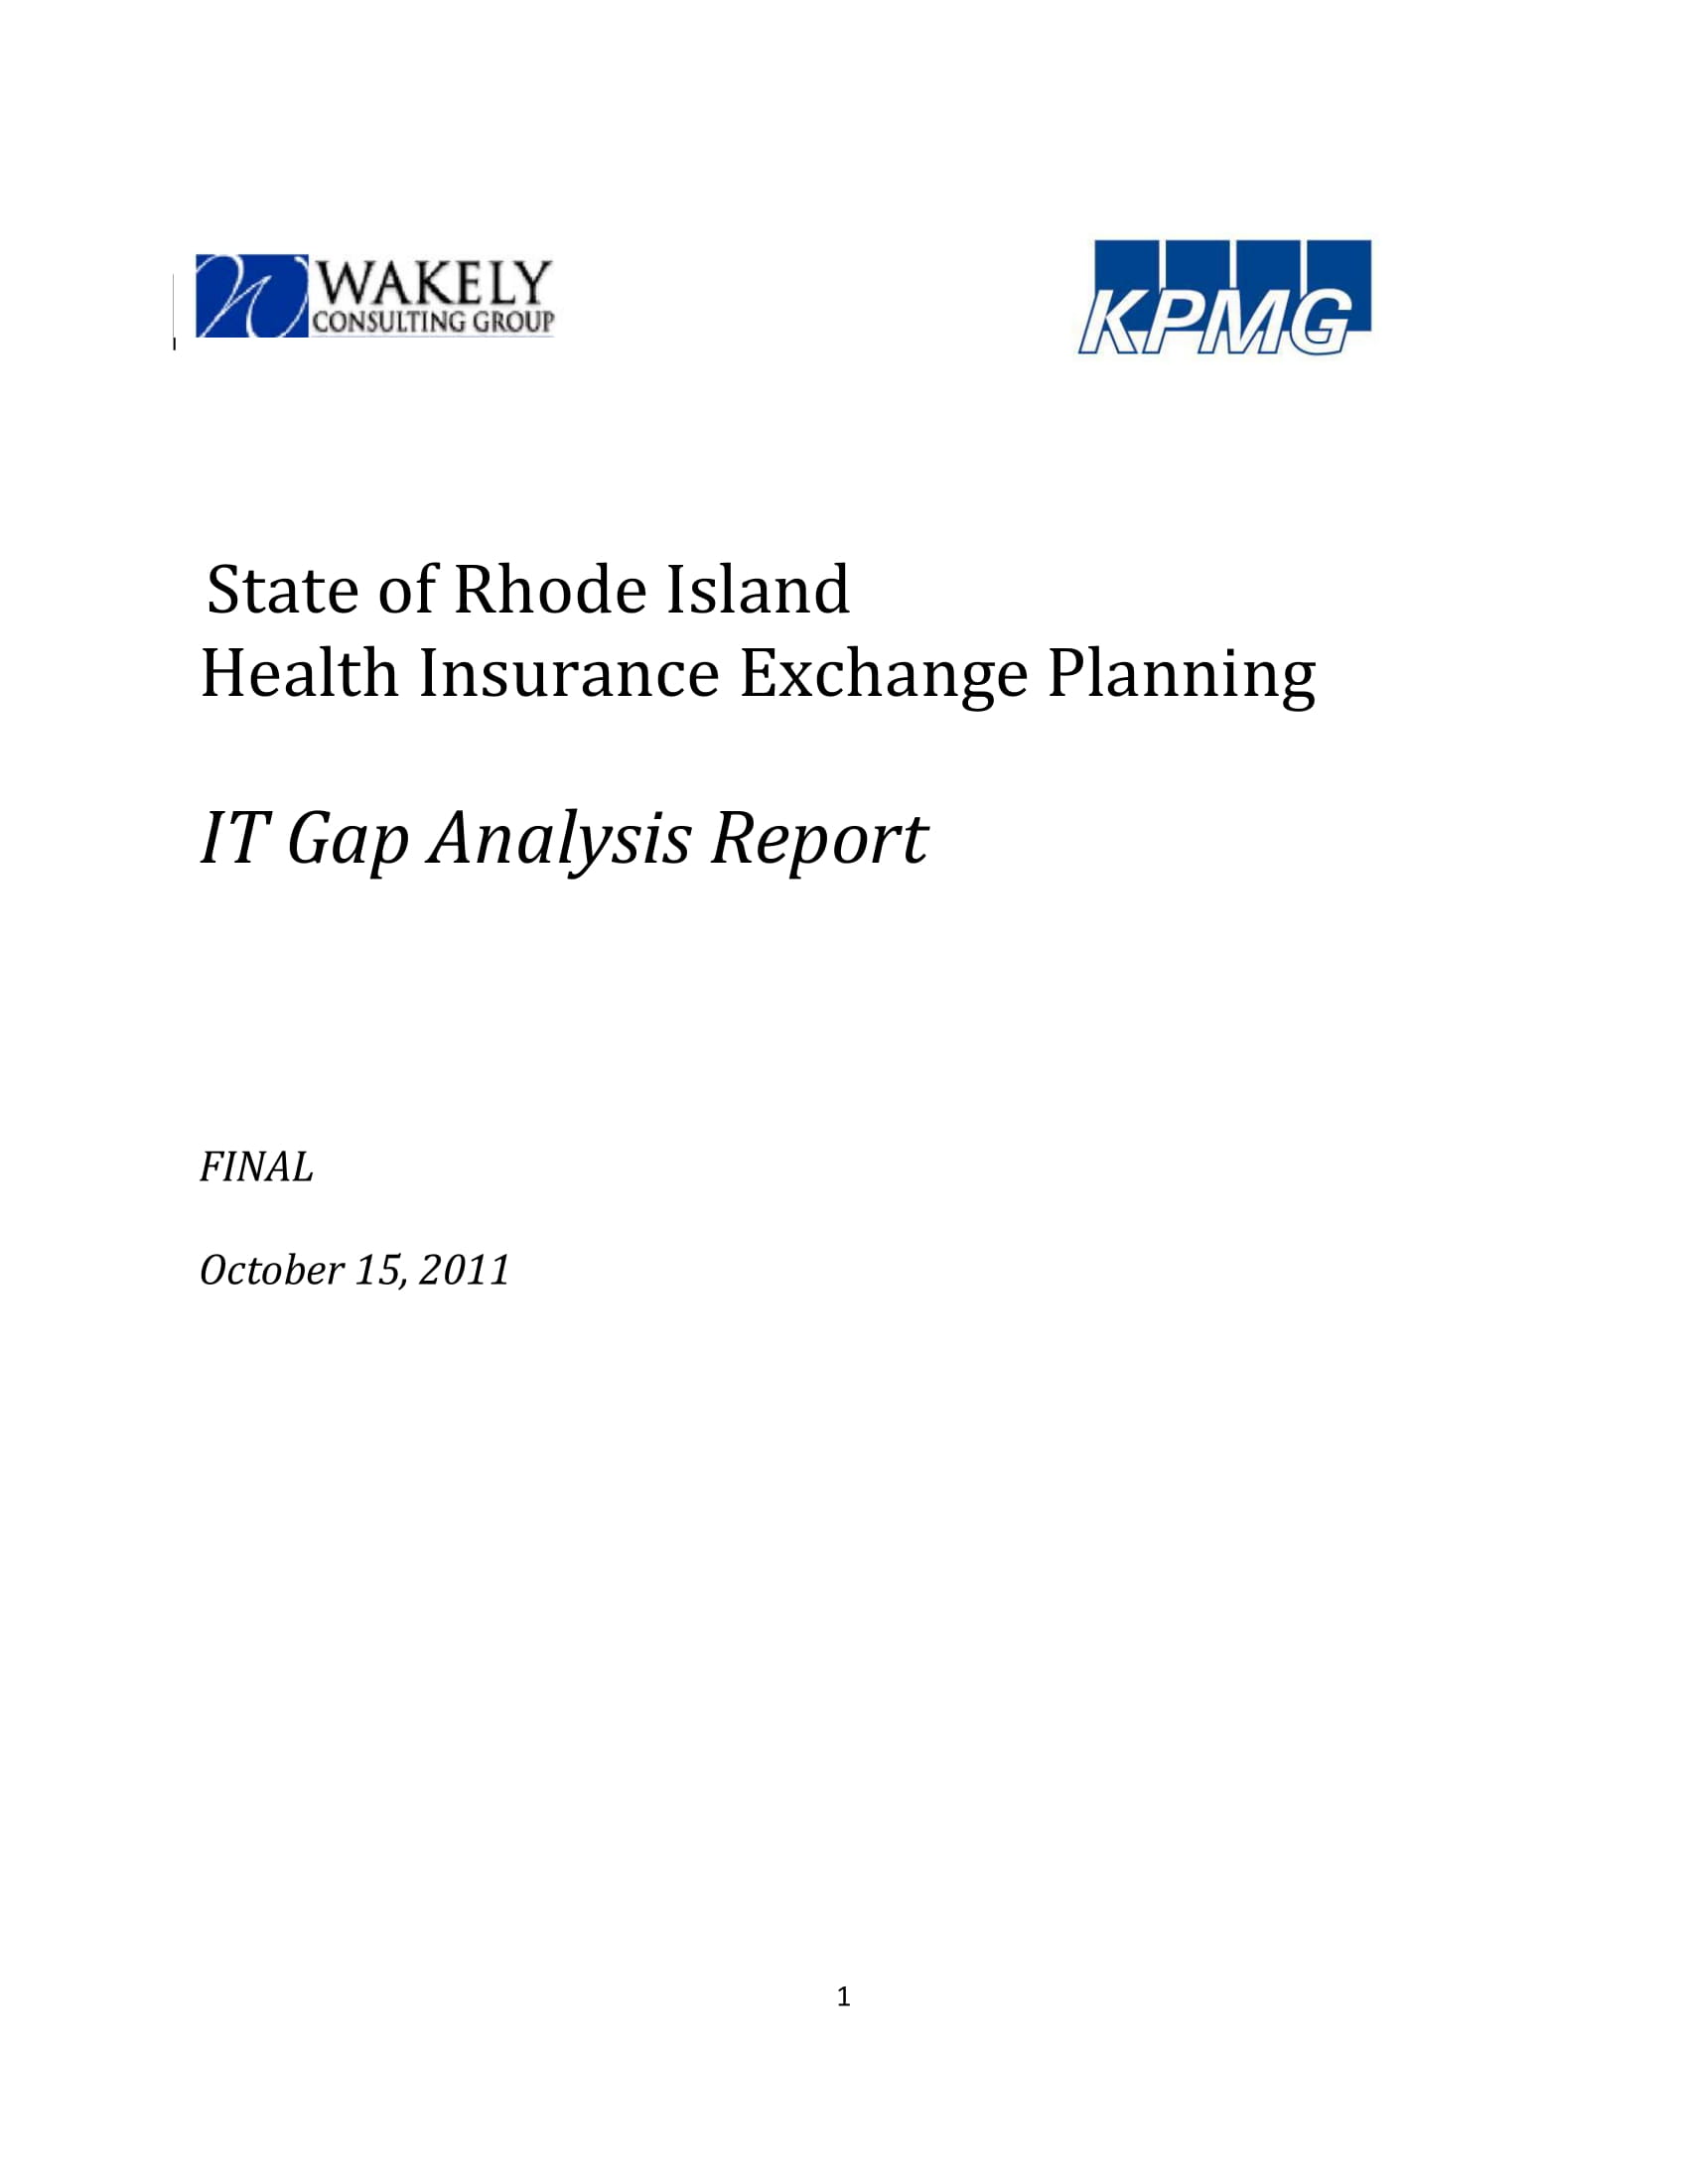 Information Technology Gap Analysis Report Example 01